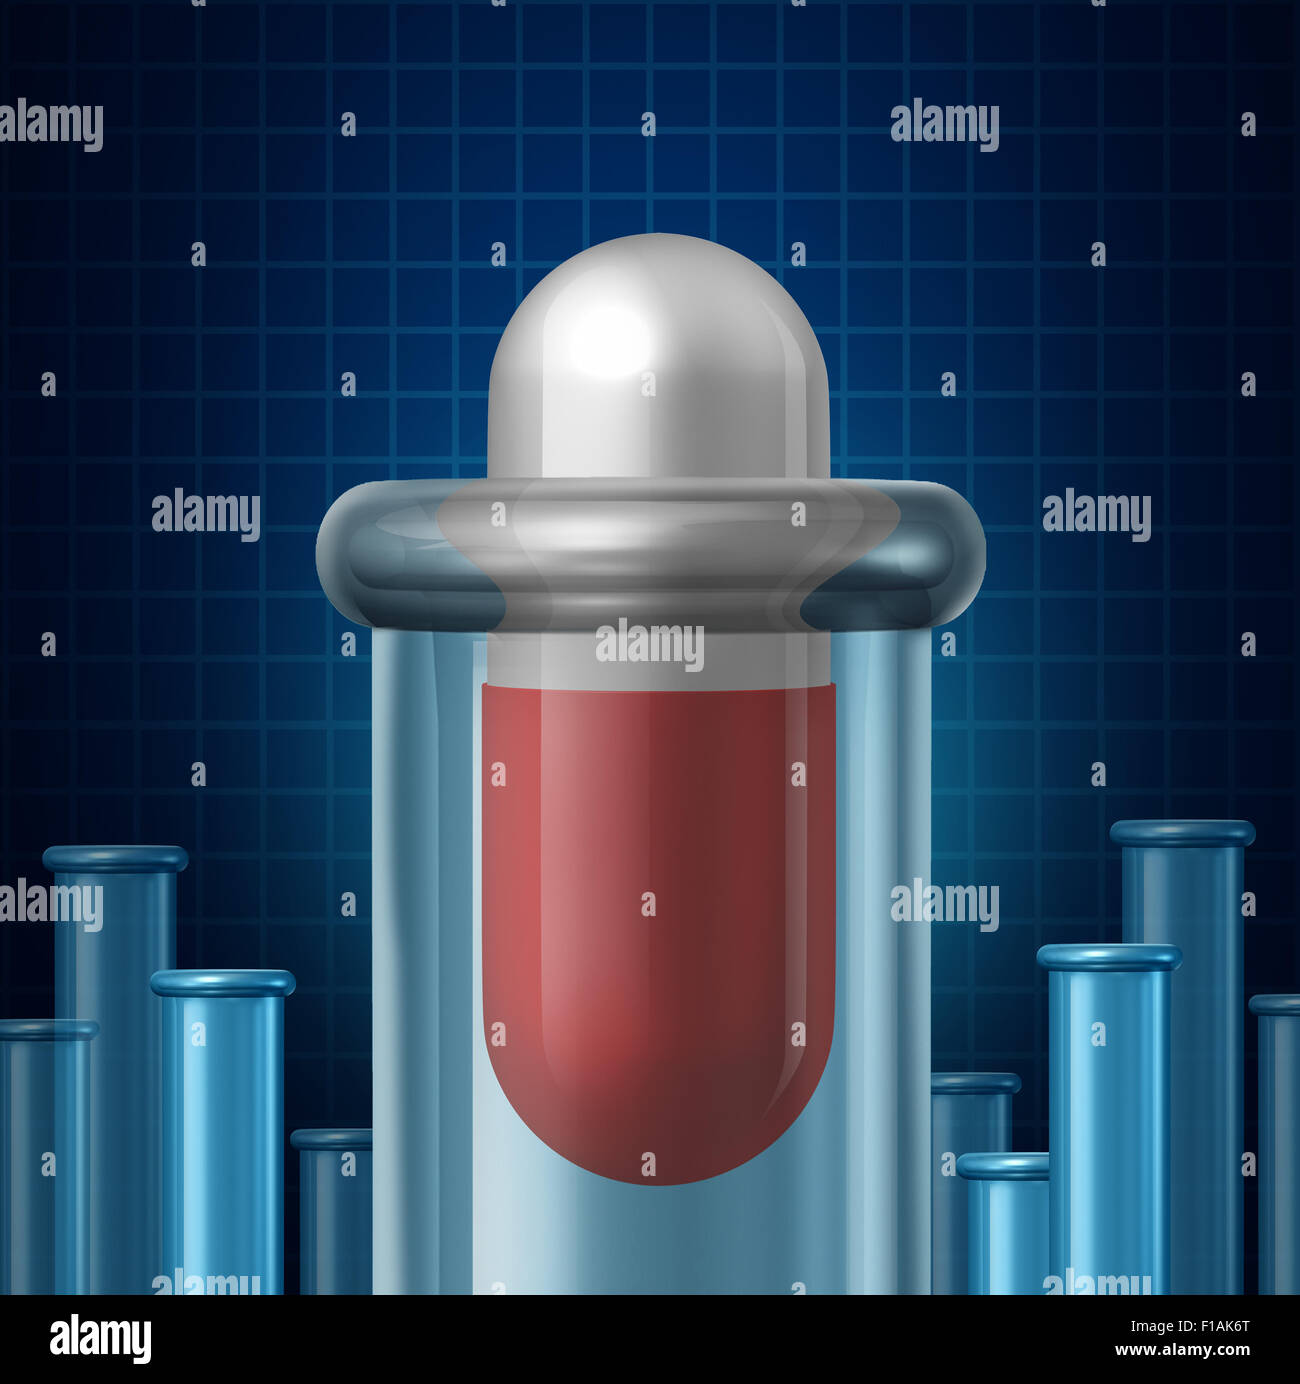 Medicine science and the pharmaceutical industry research symbol as a giant medication pill inside an experimental beacon or test tube glass container as a medical biotechnology concept for finding a cure through chemistry and technology. Stock Photo